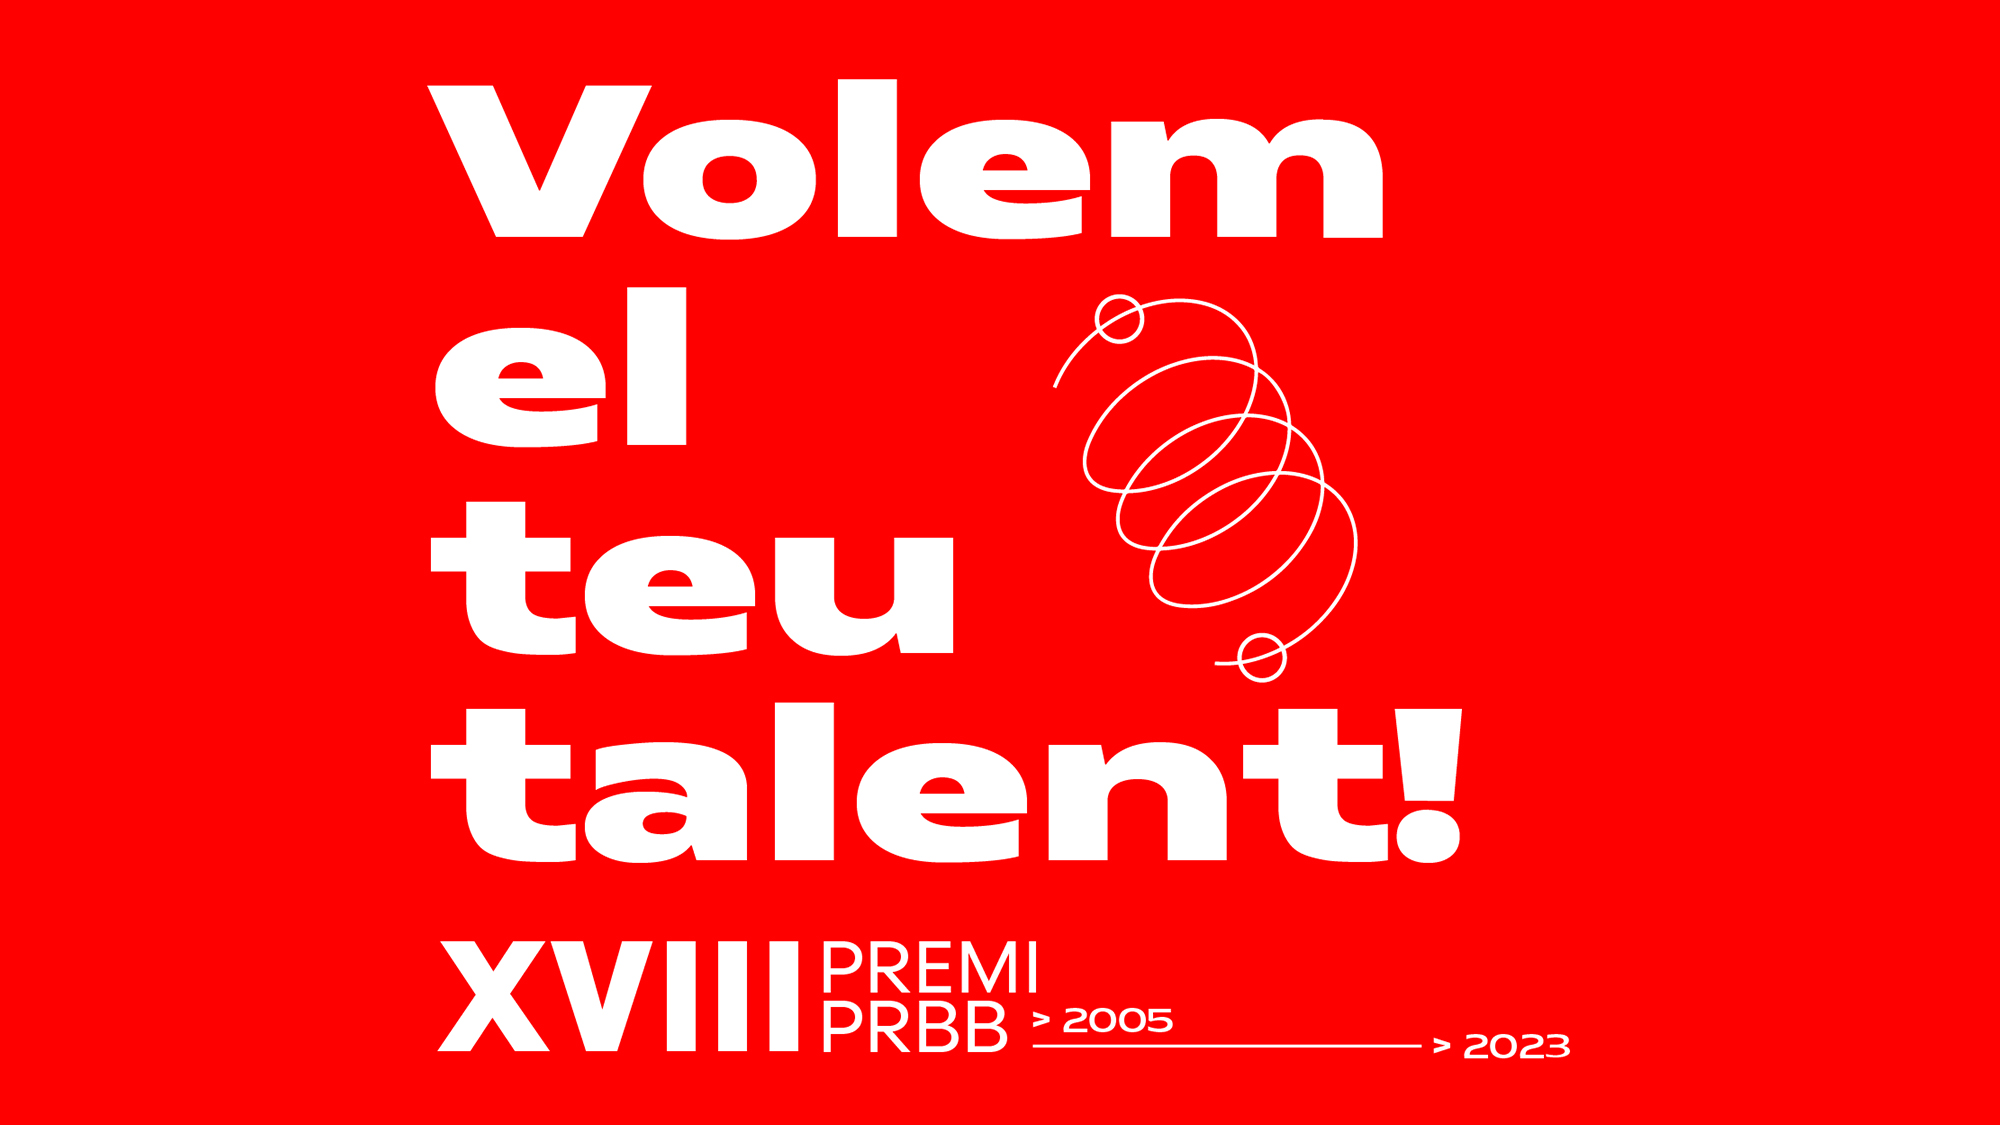 Design with letters that say 'Volem el teu talent' to announce the 18th edition of the PRBB Award